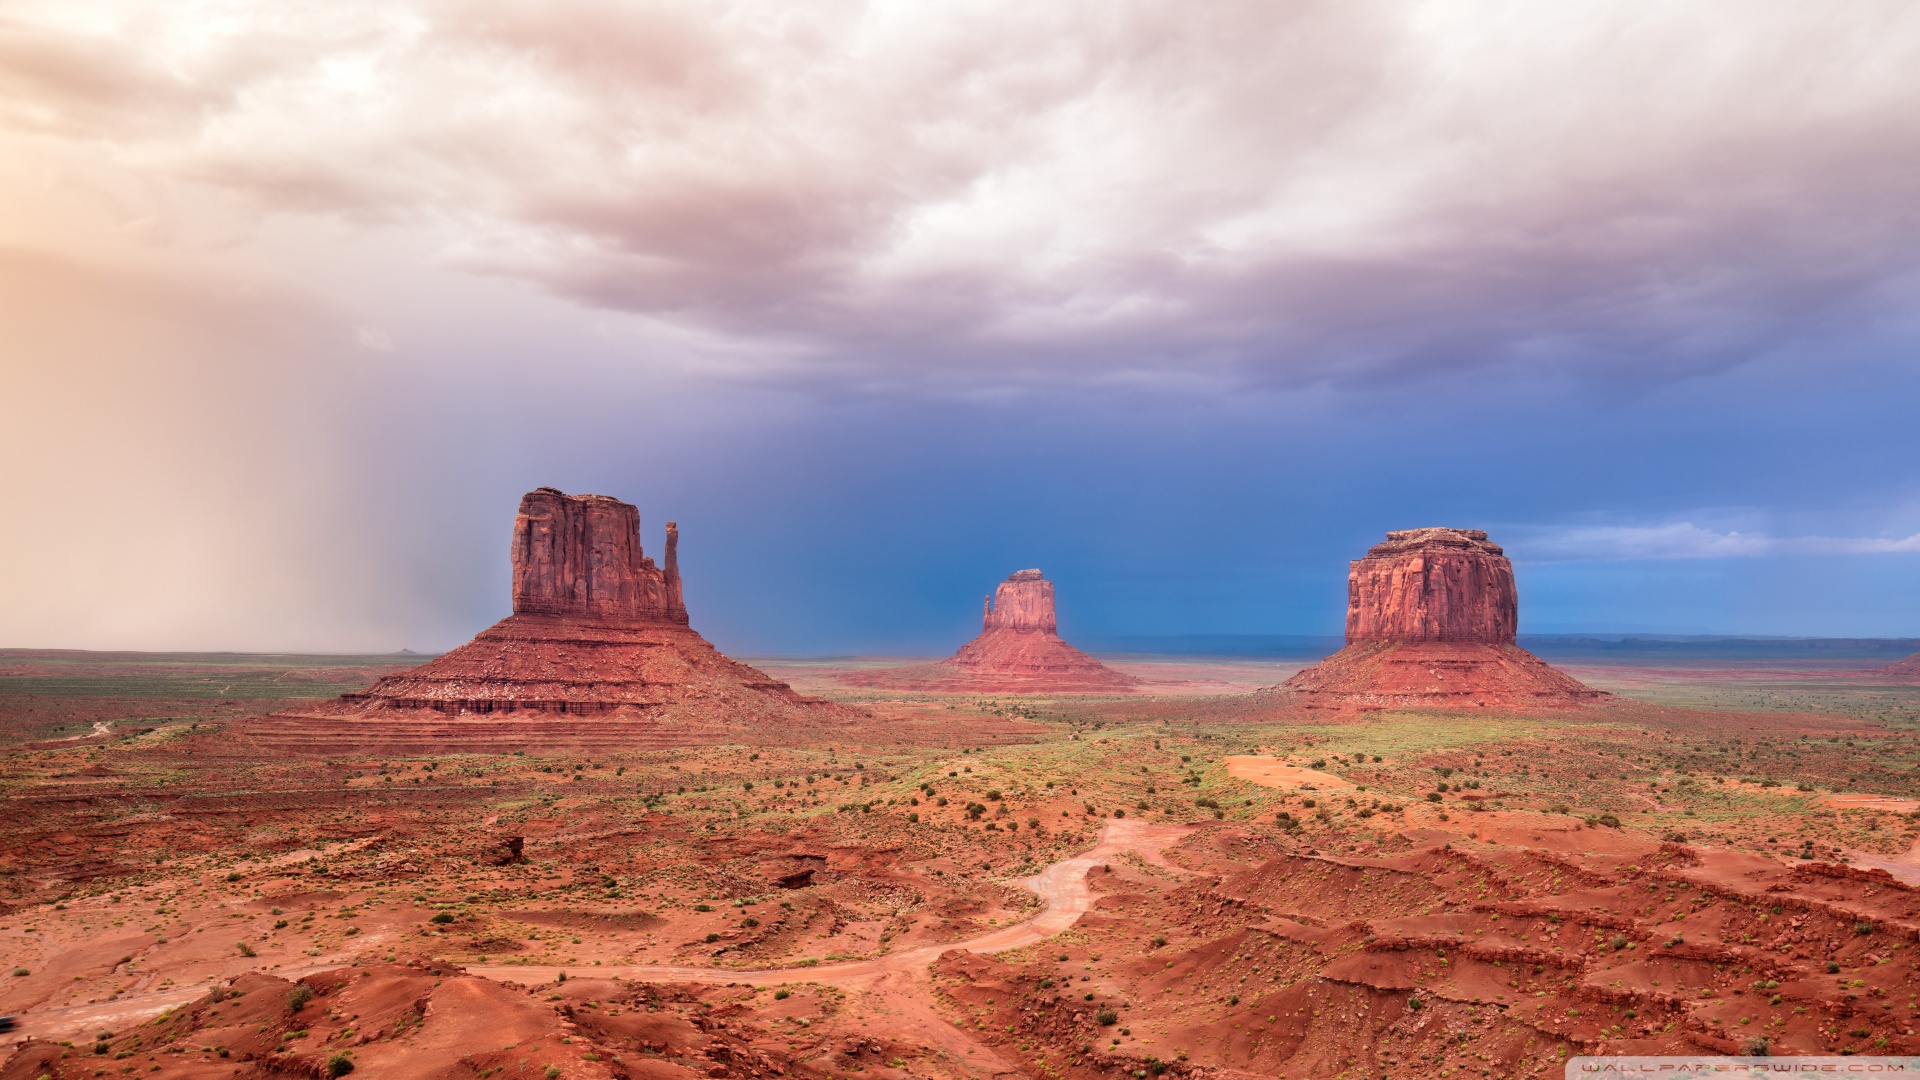 30k Monument Valley Pictures  Download Free Images on Unsplash